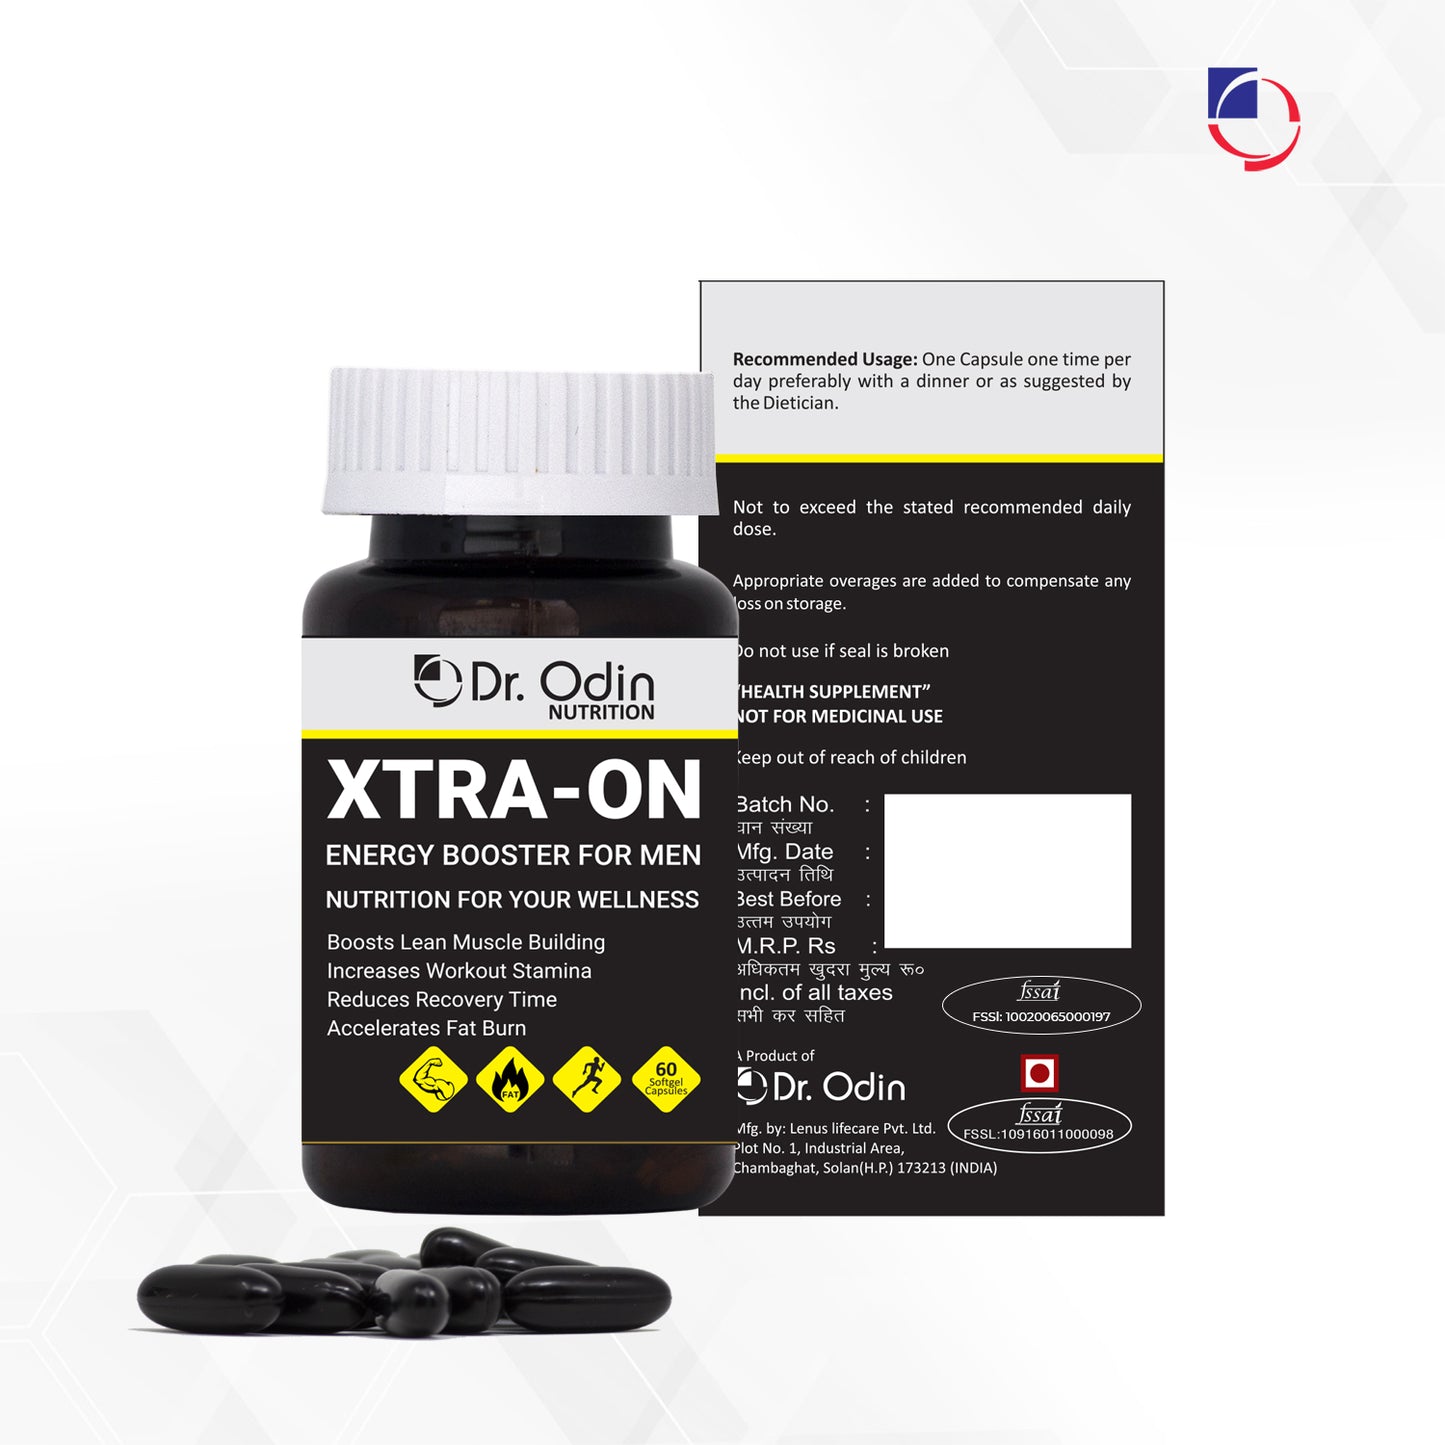 Supplements - XTRA-ON